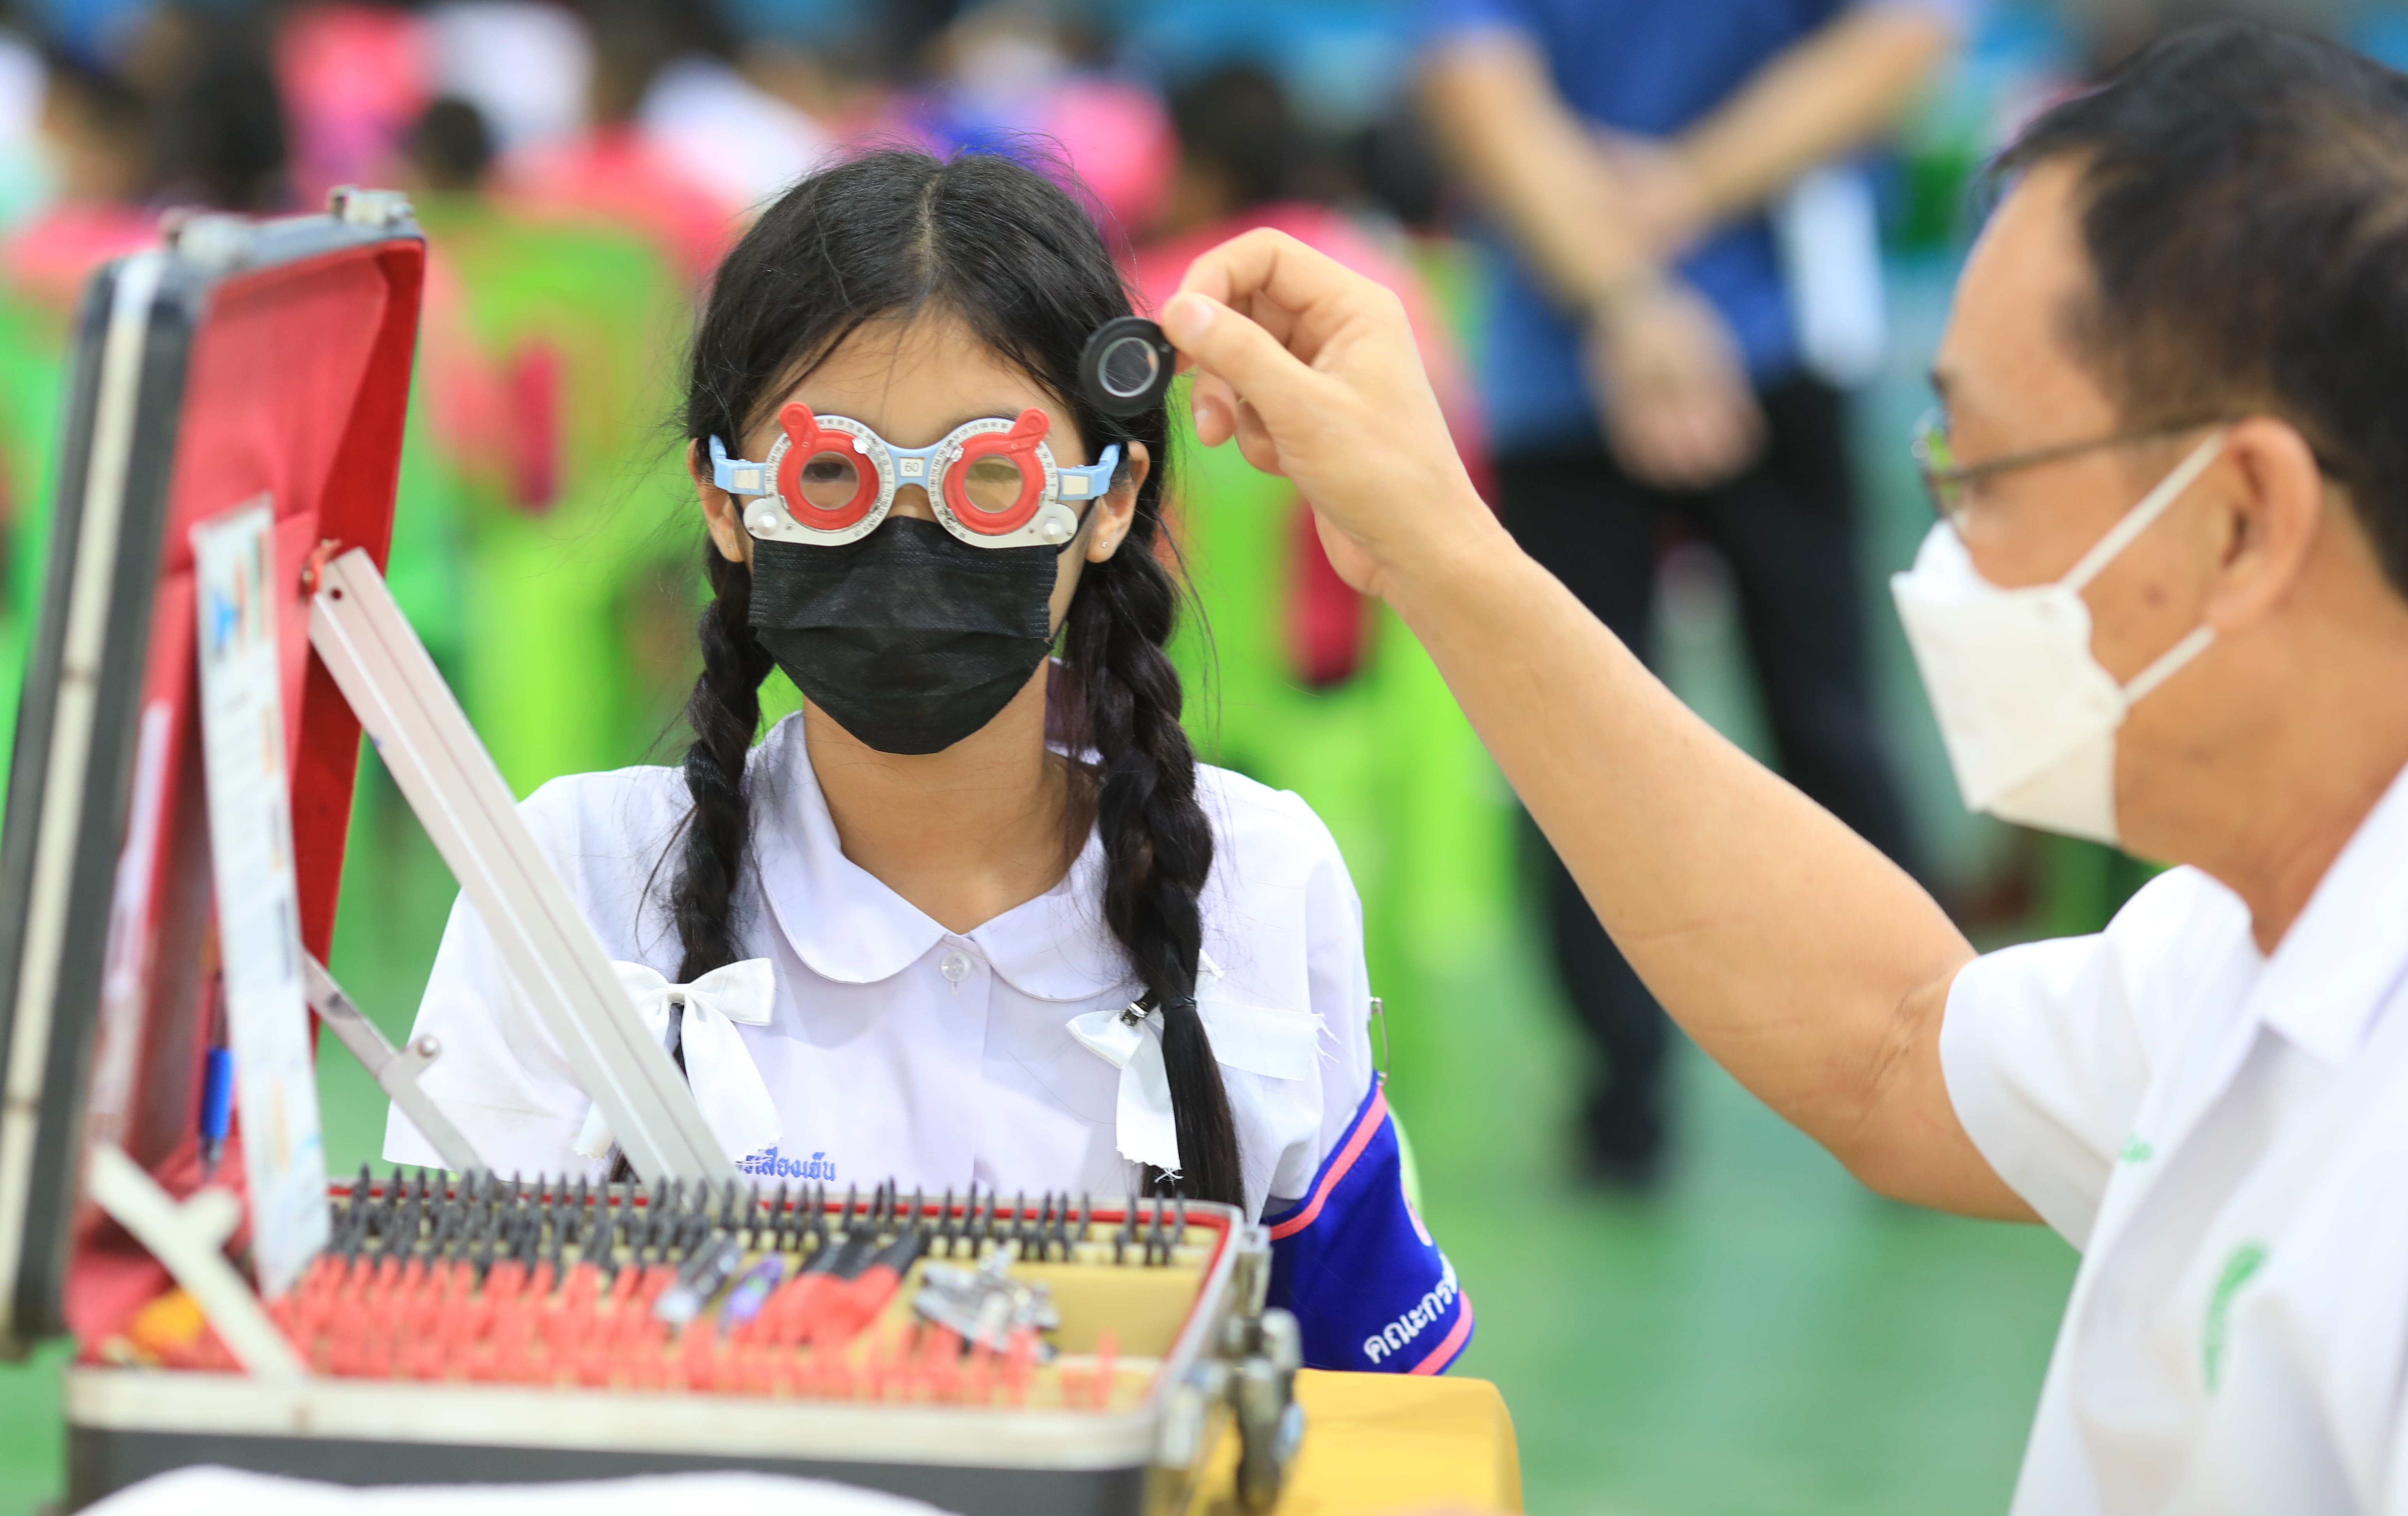 NHSO and BMA Deliver Eyeglasses to 36,000 Children with Vision Problems